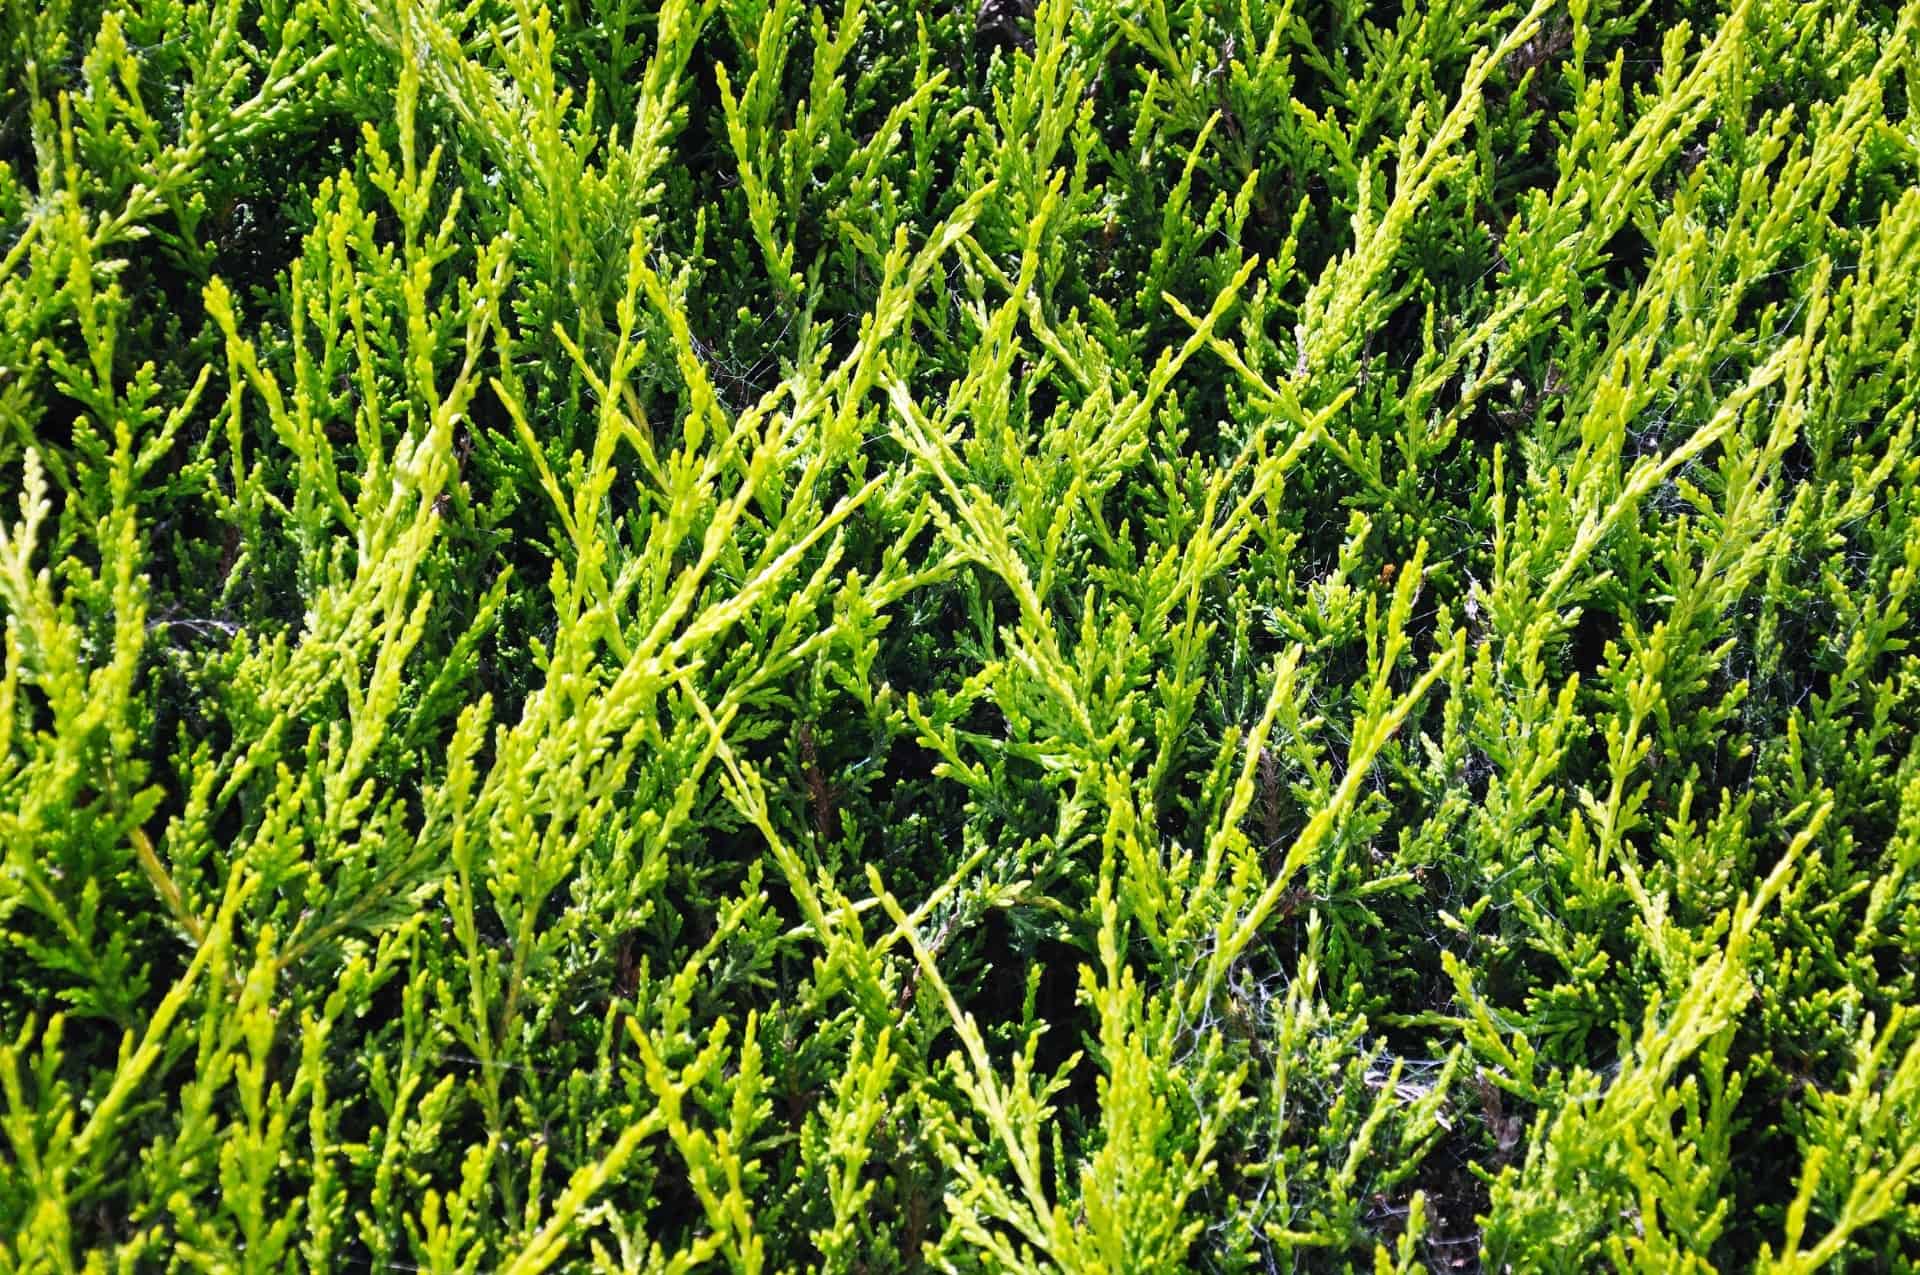 Leyland cypress is perfect for a fast-growing living fence